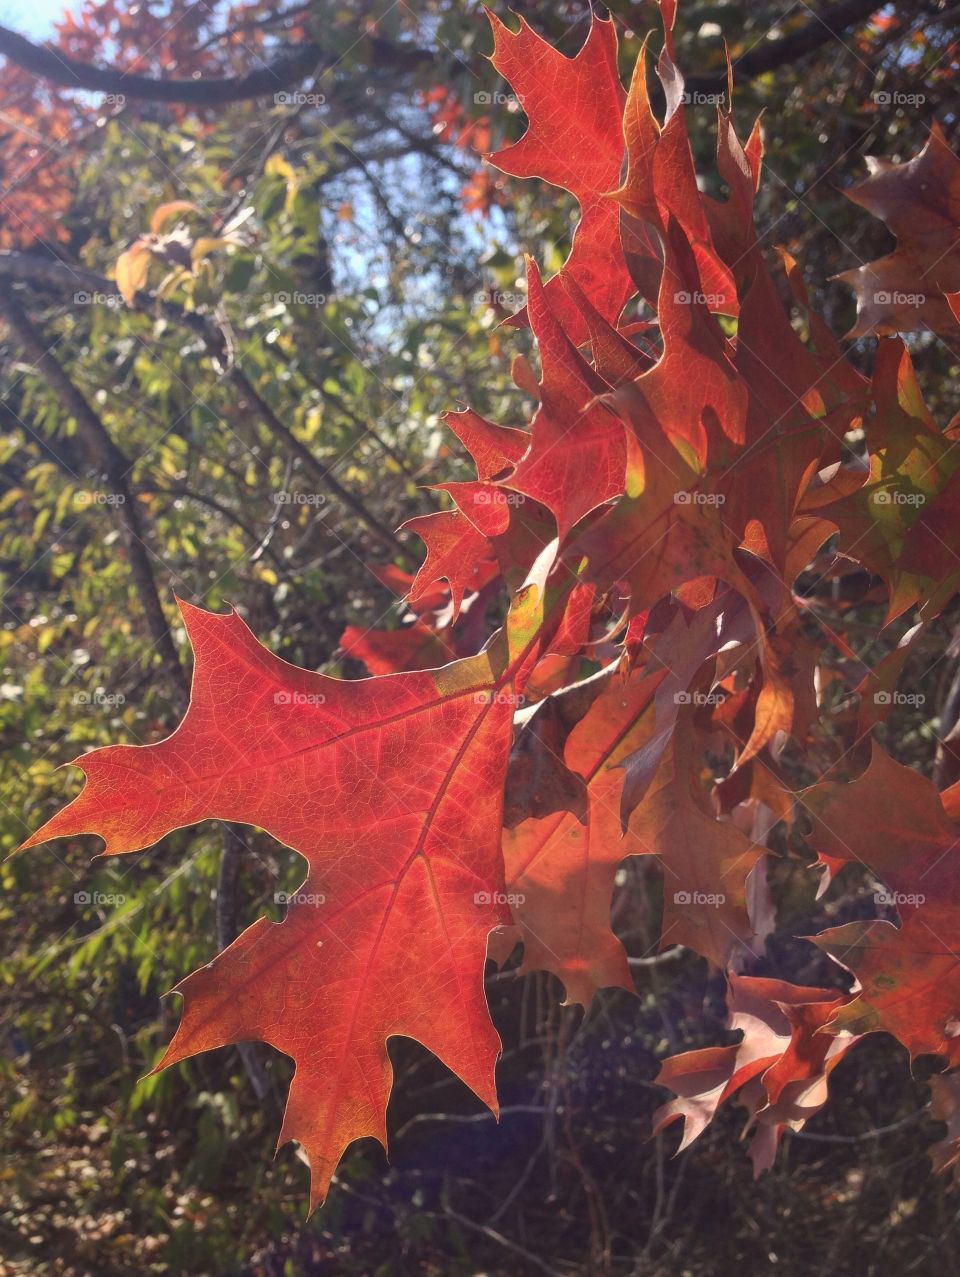 Cluster of fall leaves on low branch 